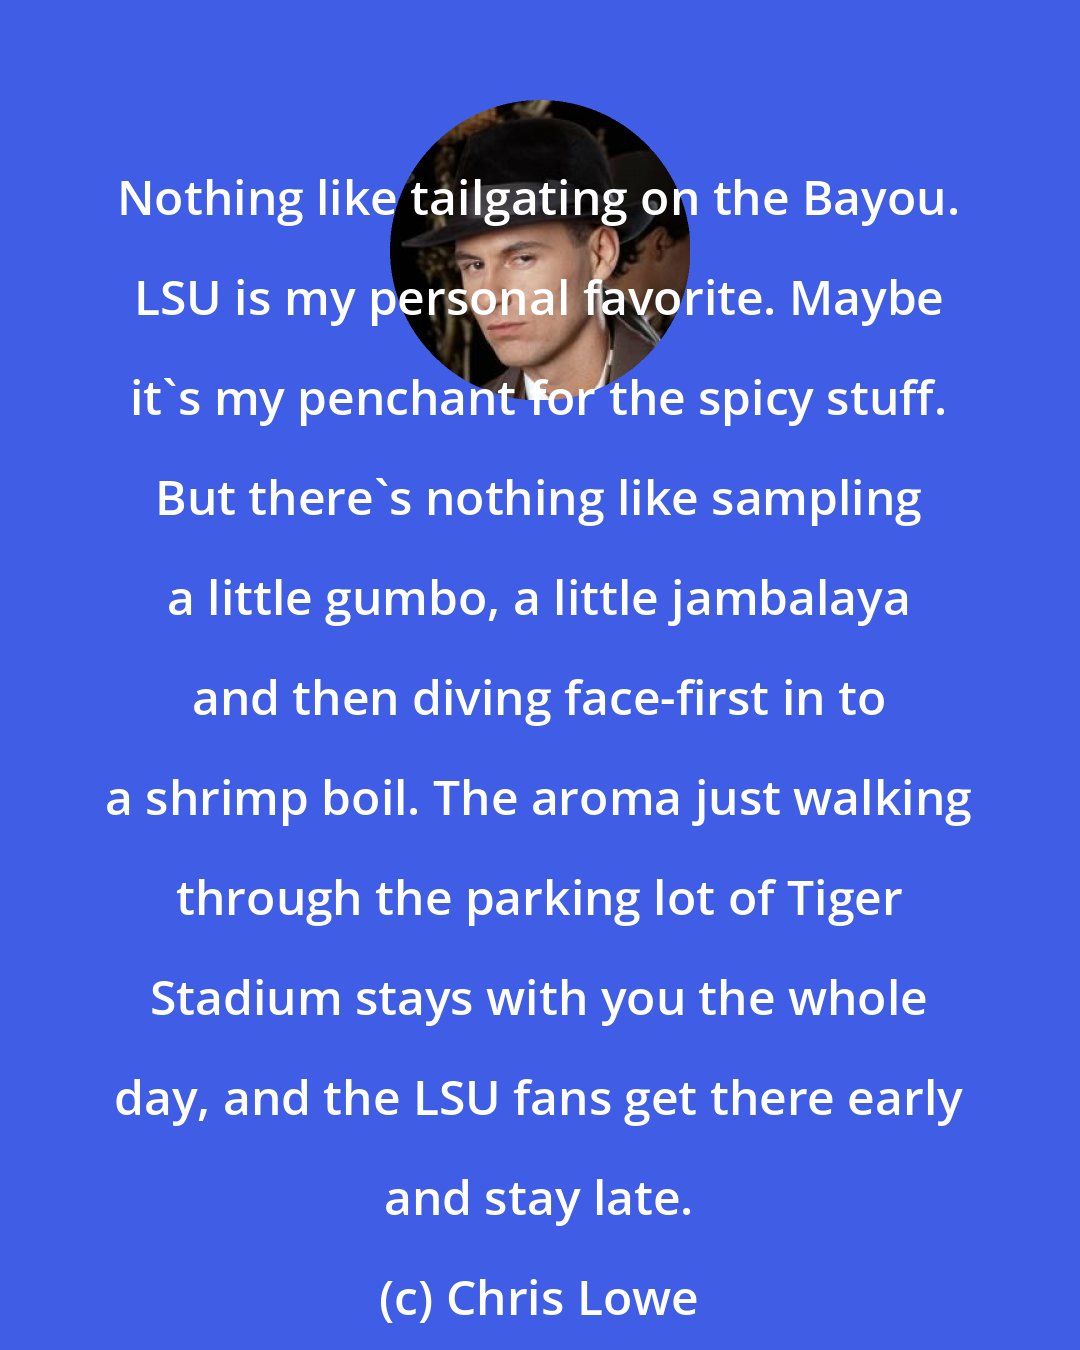 Chris Lowe: Nothing like tailgating on the Bayou. LSU is my personal favorite. Maybe it's my penchant for the spicy stuff. But there's nothing like sampling a little gumbo, a little jambalaya and then diving face-first in to a shrimp boil. The aroma just walking through the parking lot of Tiger Stadium stays with you the whole day, and the LSU fans get there early and stay late.